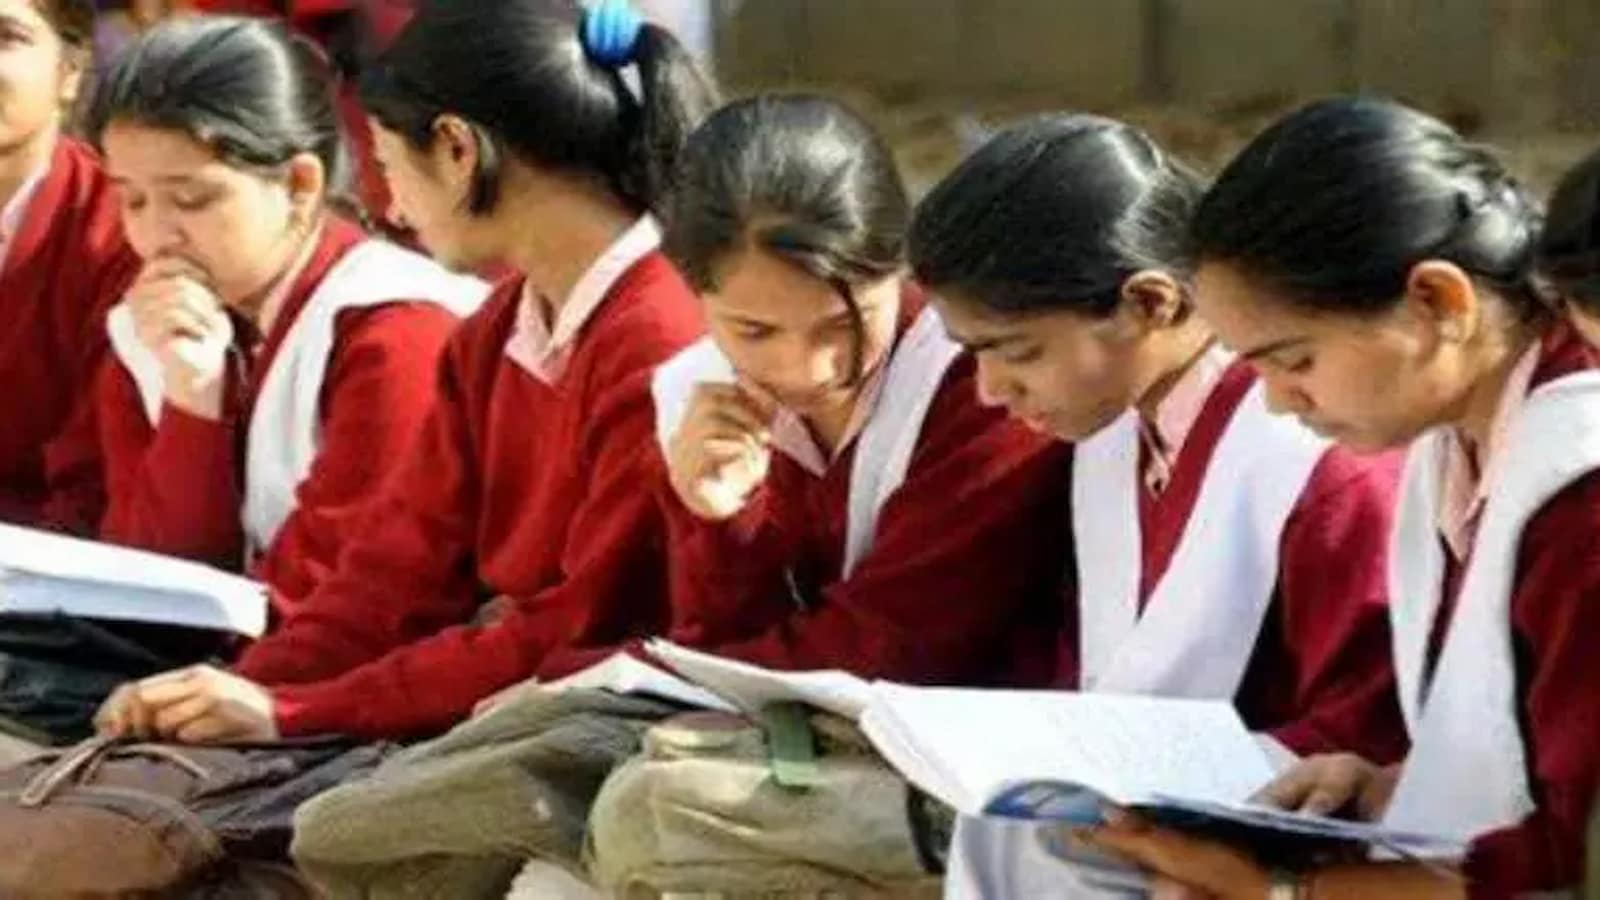 CBSE Allows Type 1 Diabetic Students to Bring Fruits and Glucometers to Exam Centers, Receives P